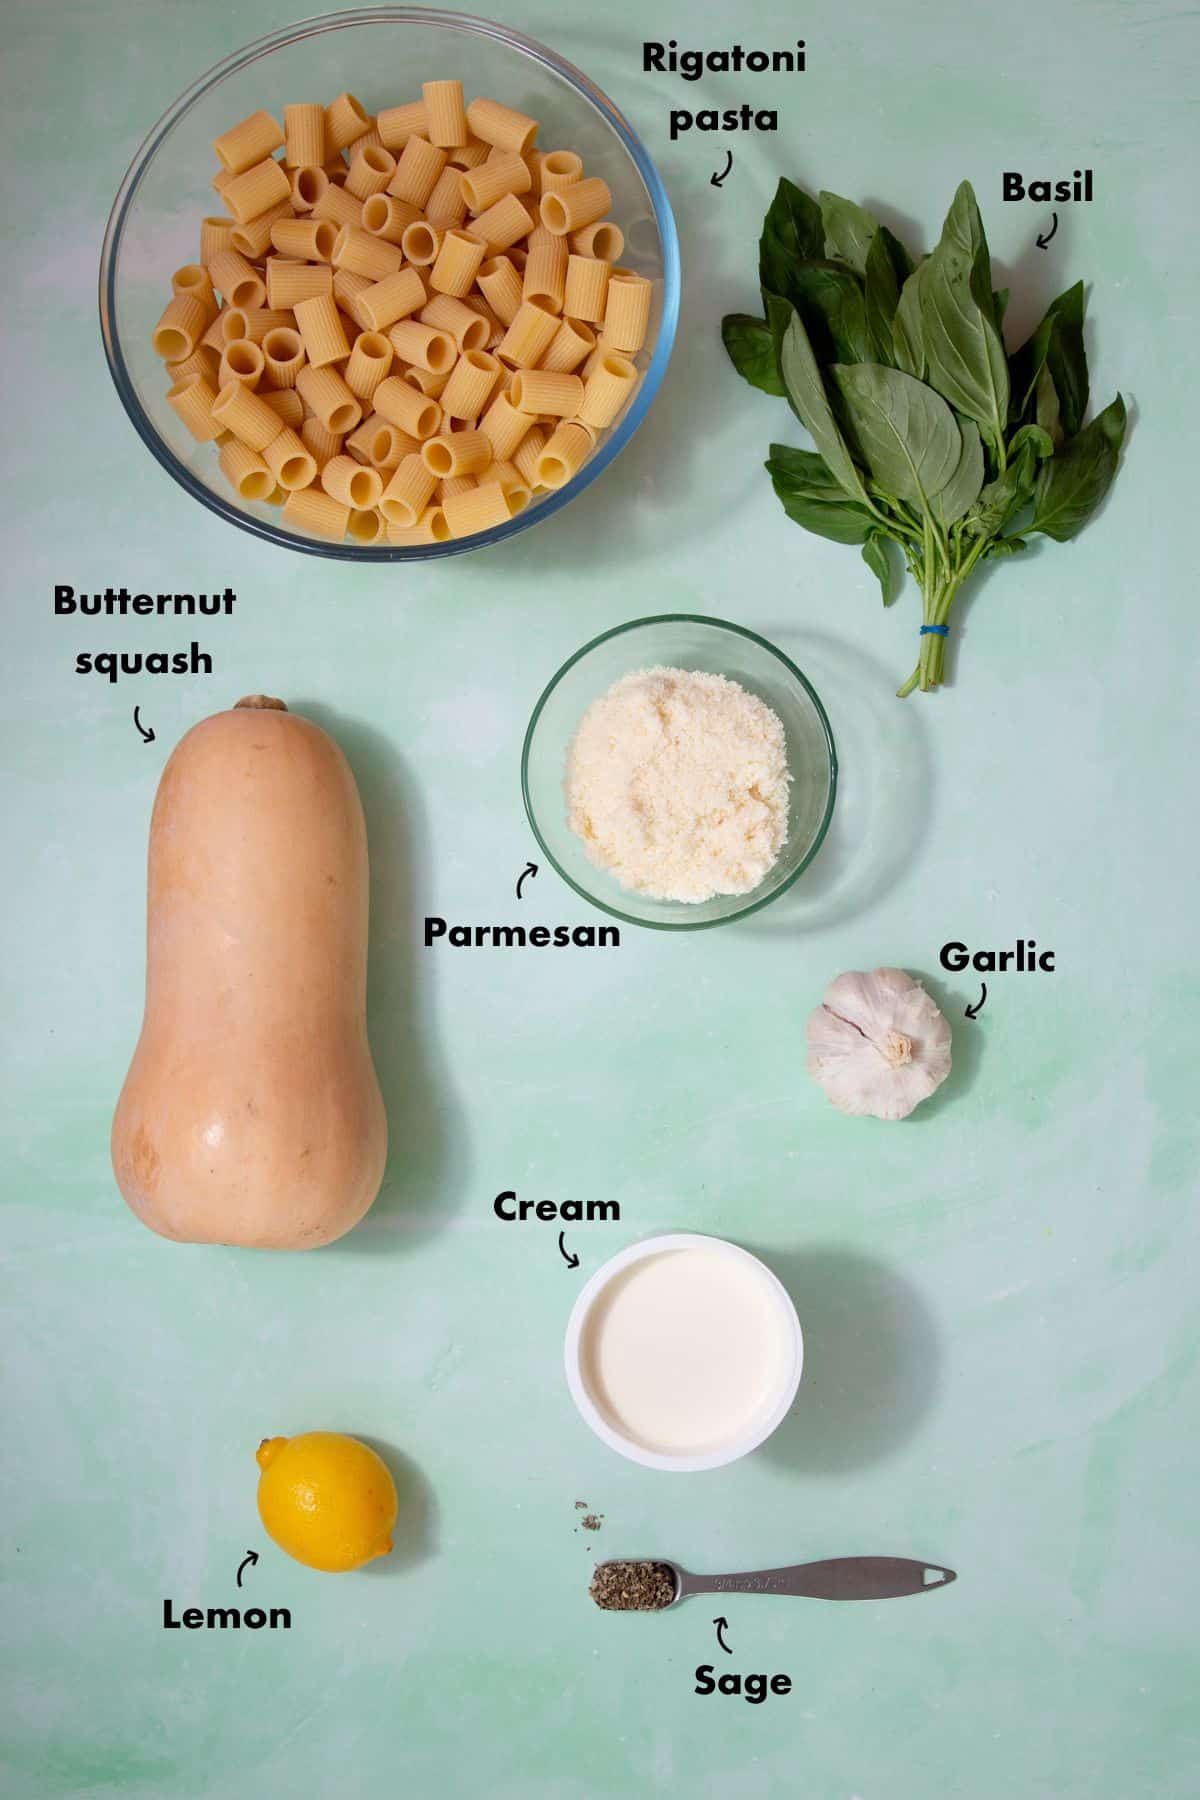 Ingredients to make butternut squash pasta laid out on a pale blue back ground and labelled.